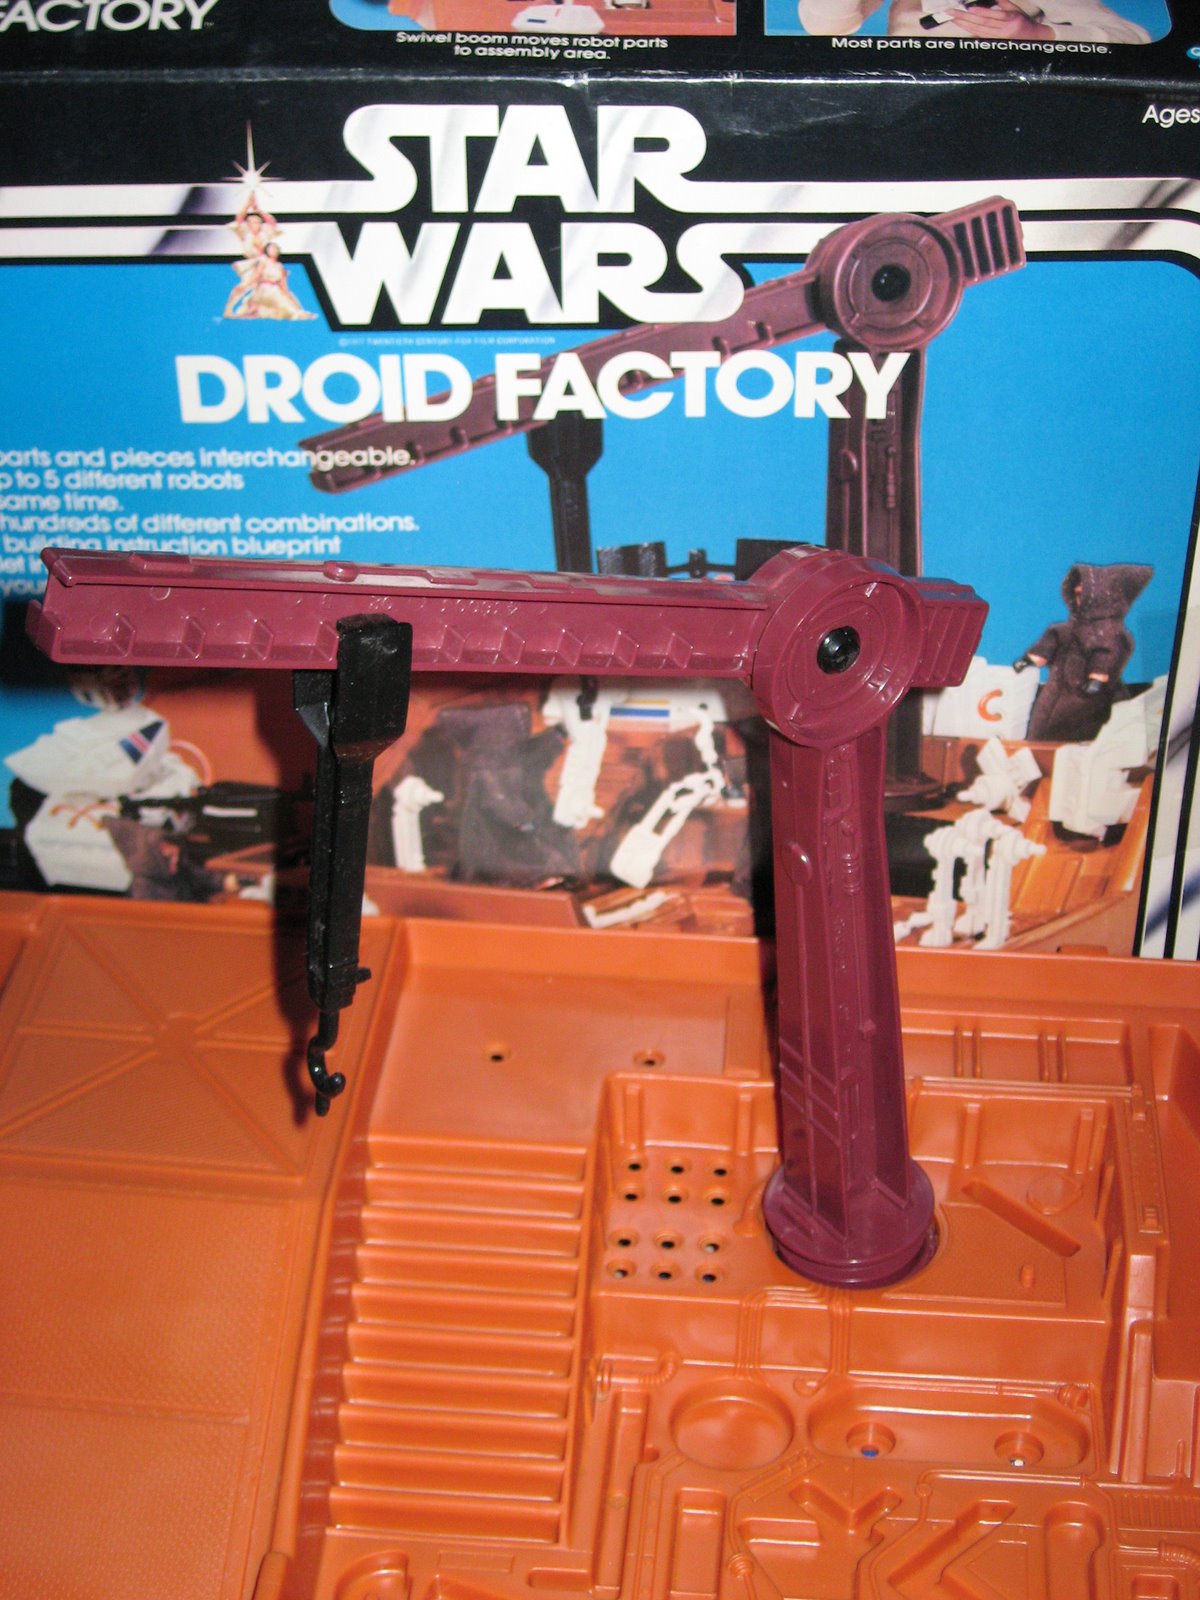 COMPLETE YOUR SET! STAR WARS VINTAGE KENNER DROID FACTORY BODY PART #1 